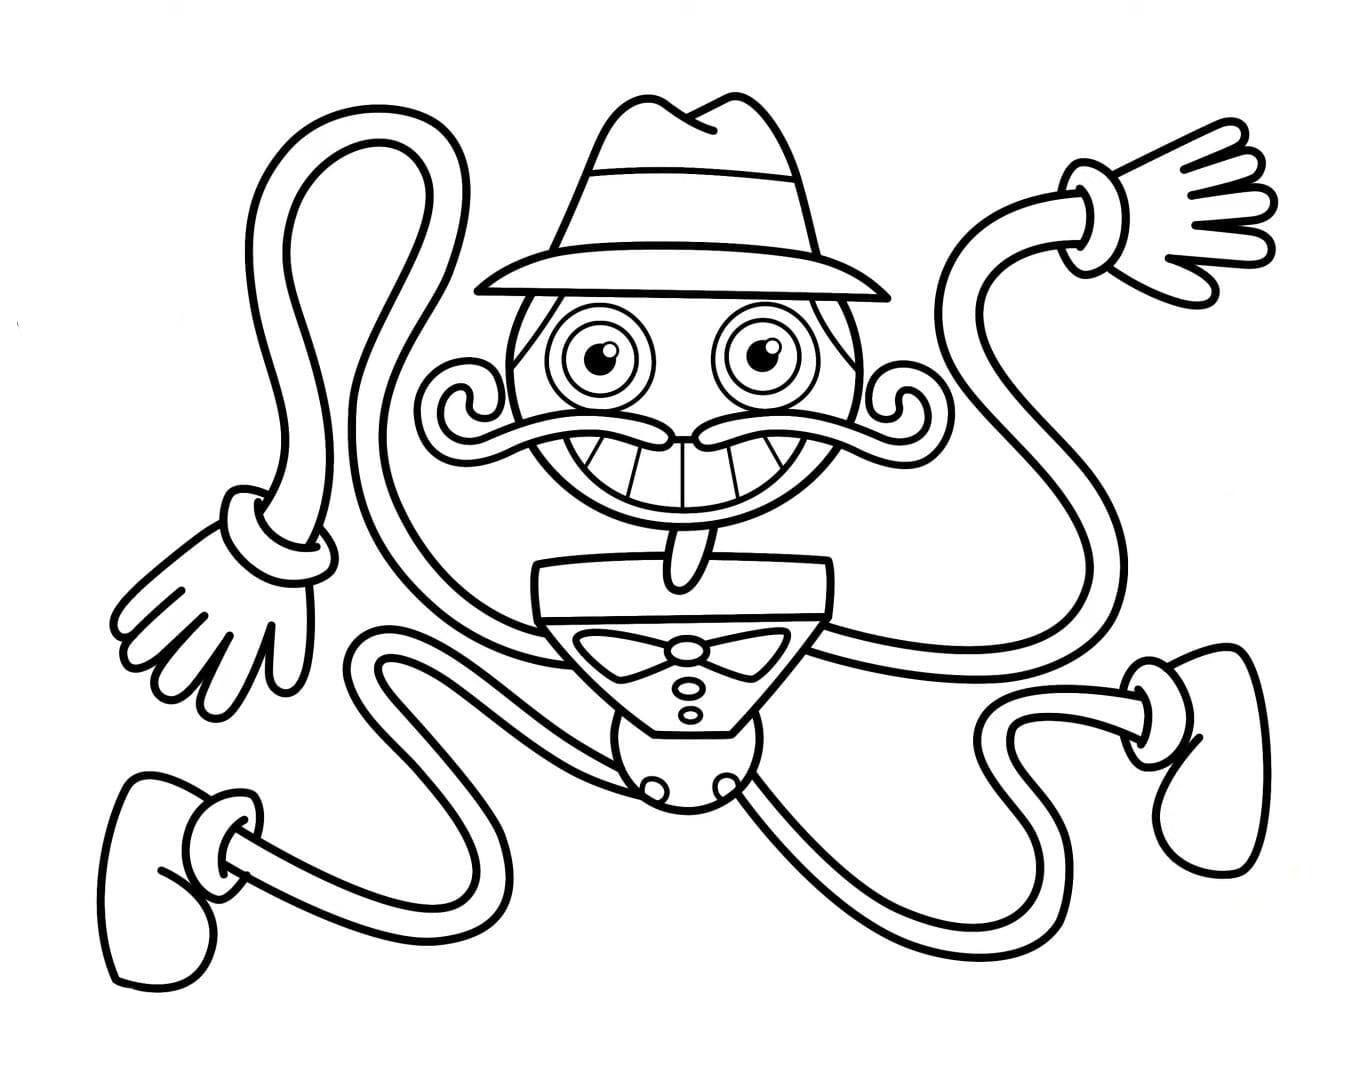 Daddy Long Legs Poppy Playtime coloring pages - Coloring pages